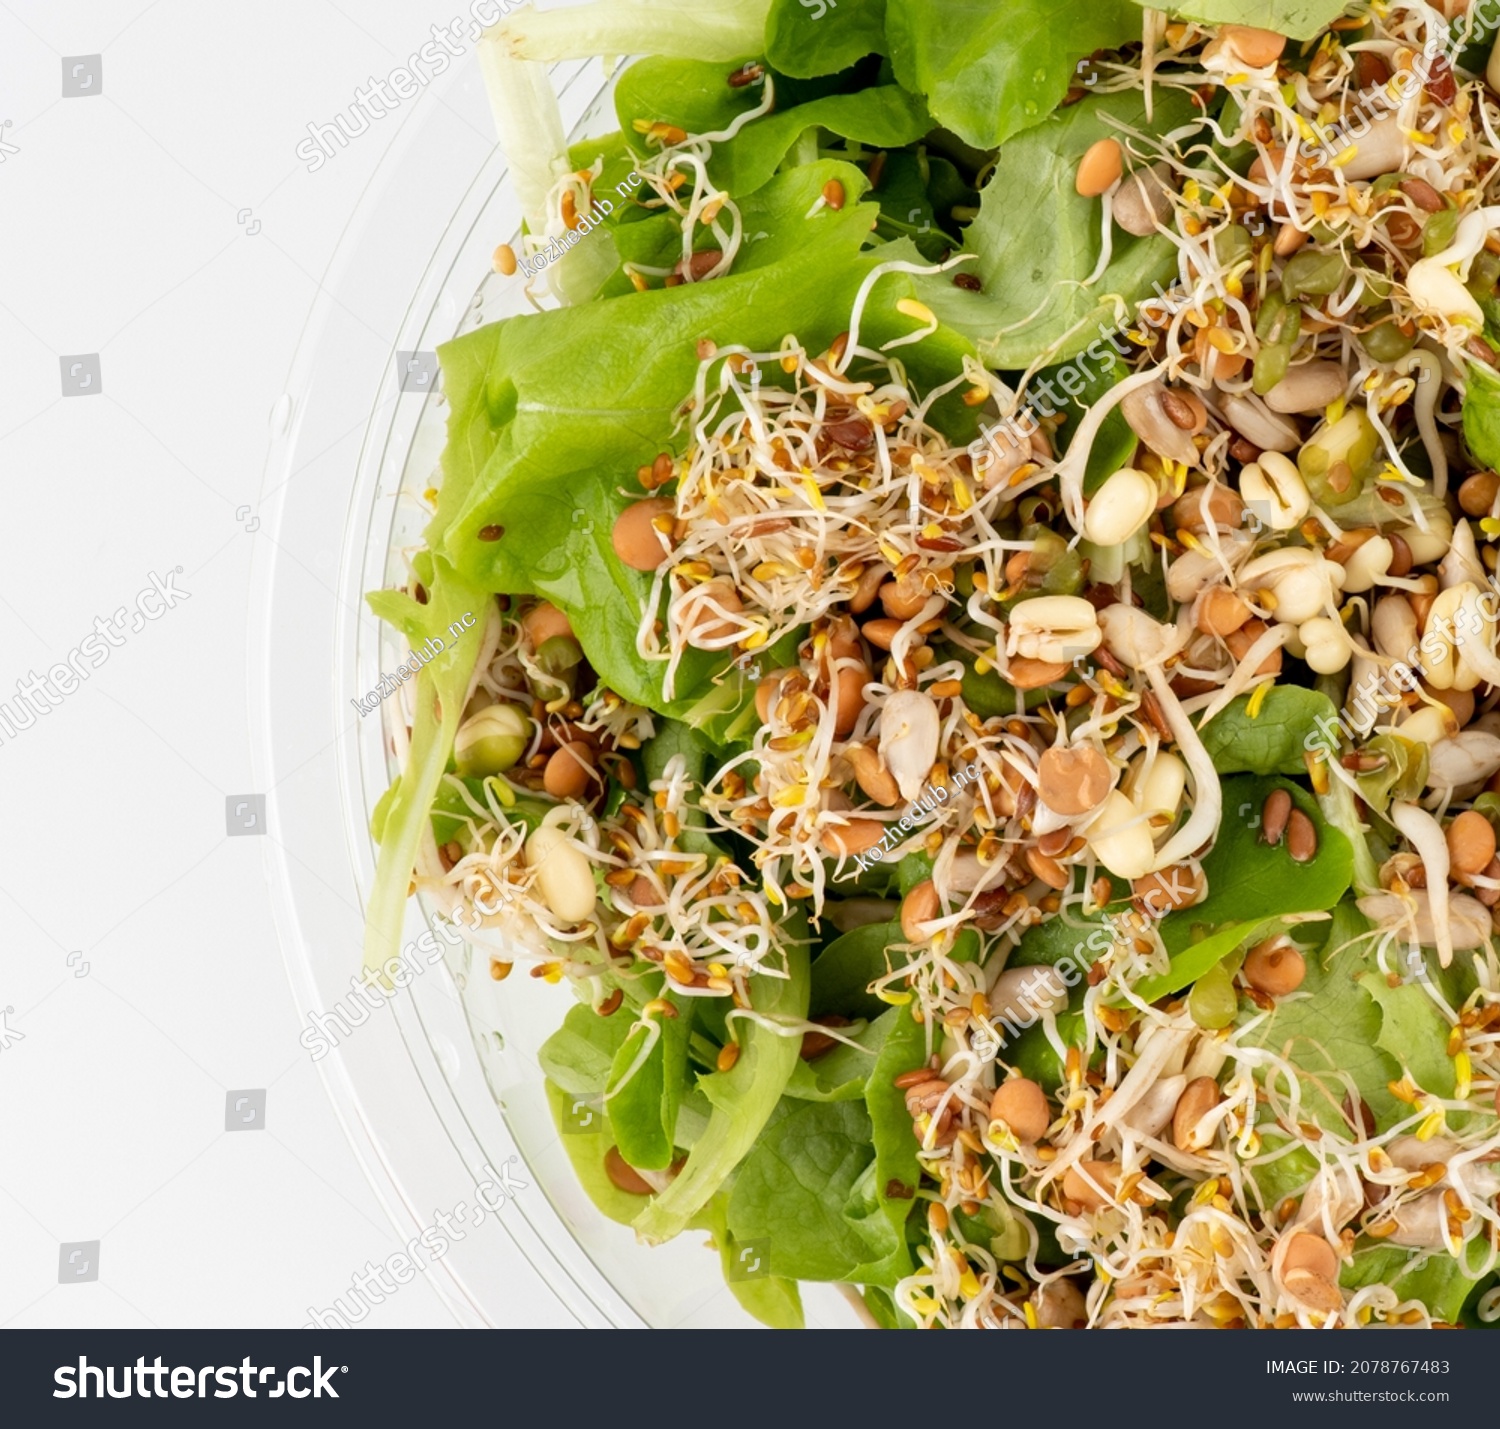 Lettuce and microgreens, alfalfa and clover sprouts, wheat bean and lentil sprouts. Organic grains good for salads and breads. Raw, vegan, vegetarian healthy food concept. Healthy diet and vegetarian  #2078767483